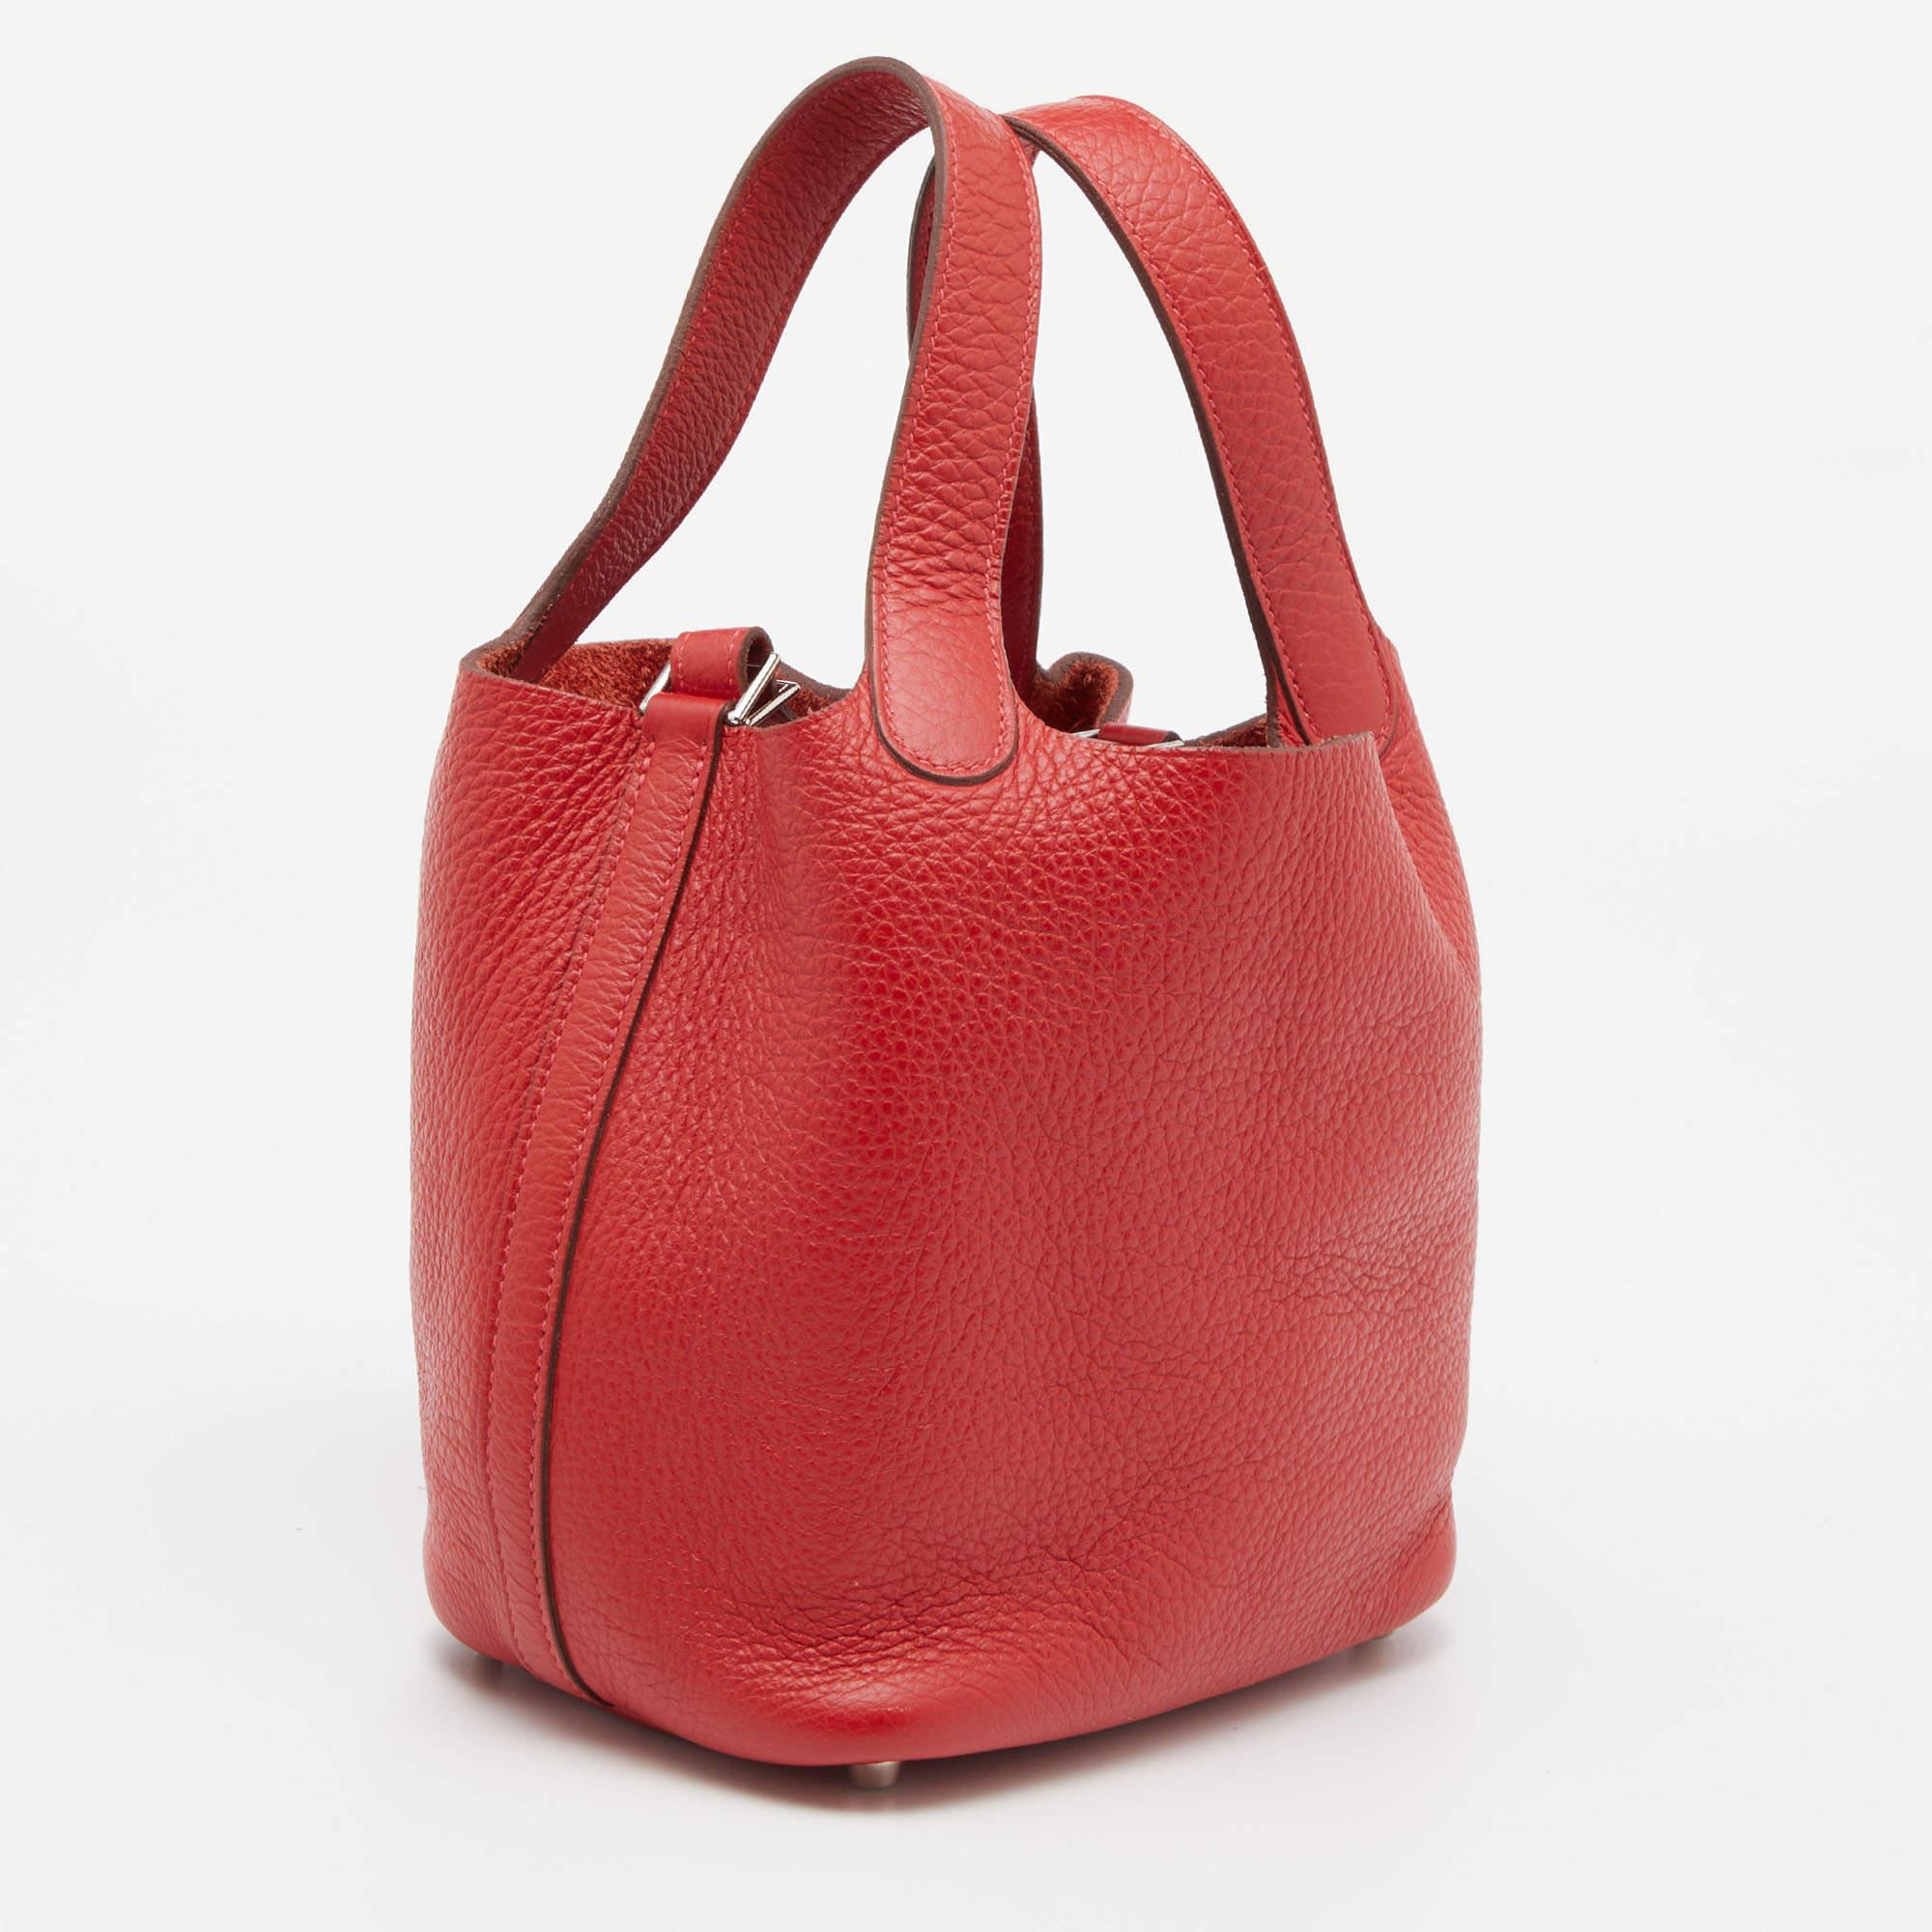 Hermes Rouge Tomate Taurillon Clemence Leather Picotin Lock 18 Bag In Good Condition In Dubai, Al Qouz 2